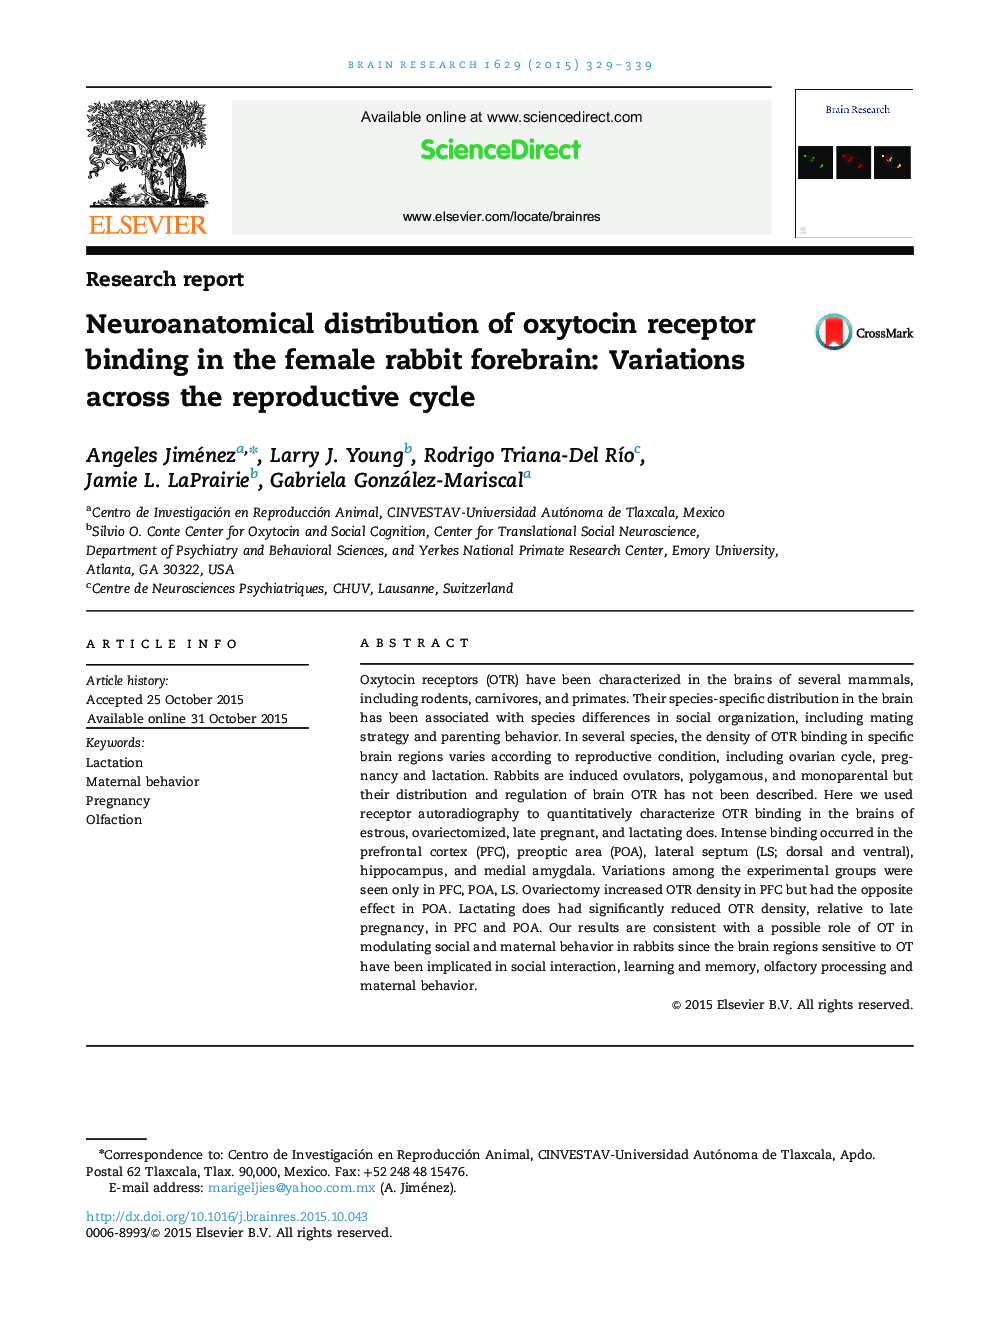 Research reportNeuroanatomical distribution of oxytocin receptor binding in the female rabbit forebrain: Variations across the reproductive cycle